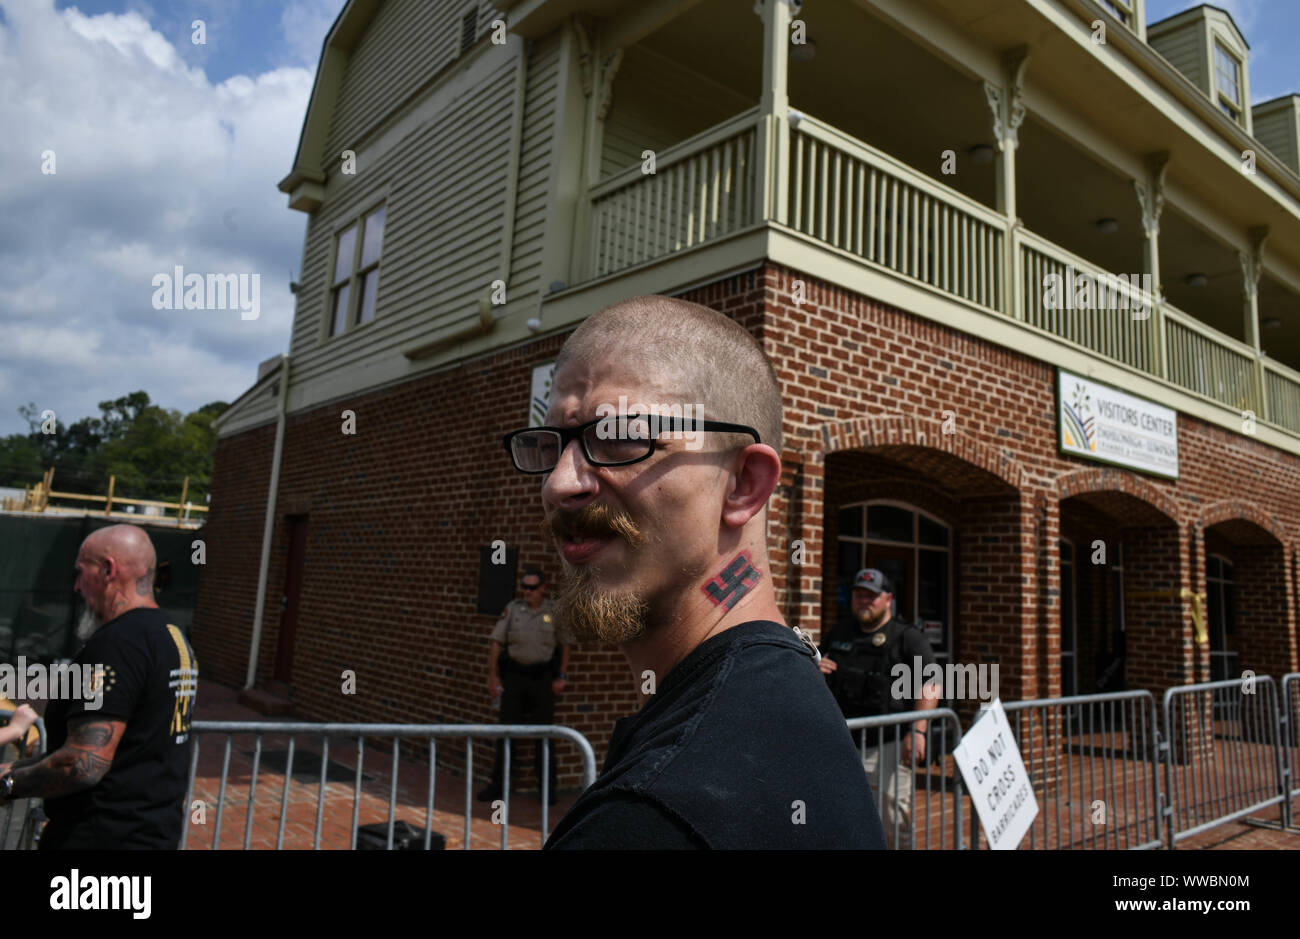 Dahlonega, Georgia, USA. 14th Sep, 2019. Tennessee resident KYNAN DUTTON, who once moved to North Dakota to build an all-white enclave there, watches a rally organized by longtime white nationalist leader Chester Doles in Dahonega, Georgia on Saturday. Doles billed the event, which drew around 50 supporters, as an "American Patriot Rally"" to honor President Trump. Around 100 counter-protesters including affiliates of the so-called "Antifa"" movement showed up, as well as hundreds of law enforcement agents from surrounding counties as shops and restaurants in the small, north Georgia Stock Photo